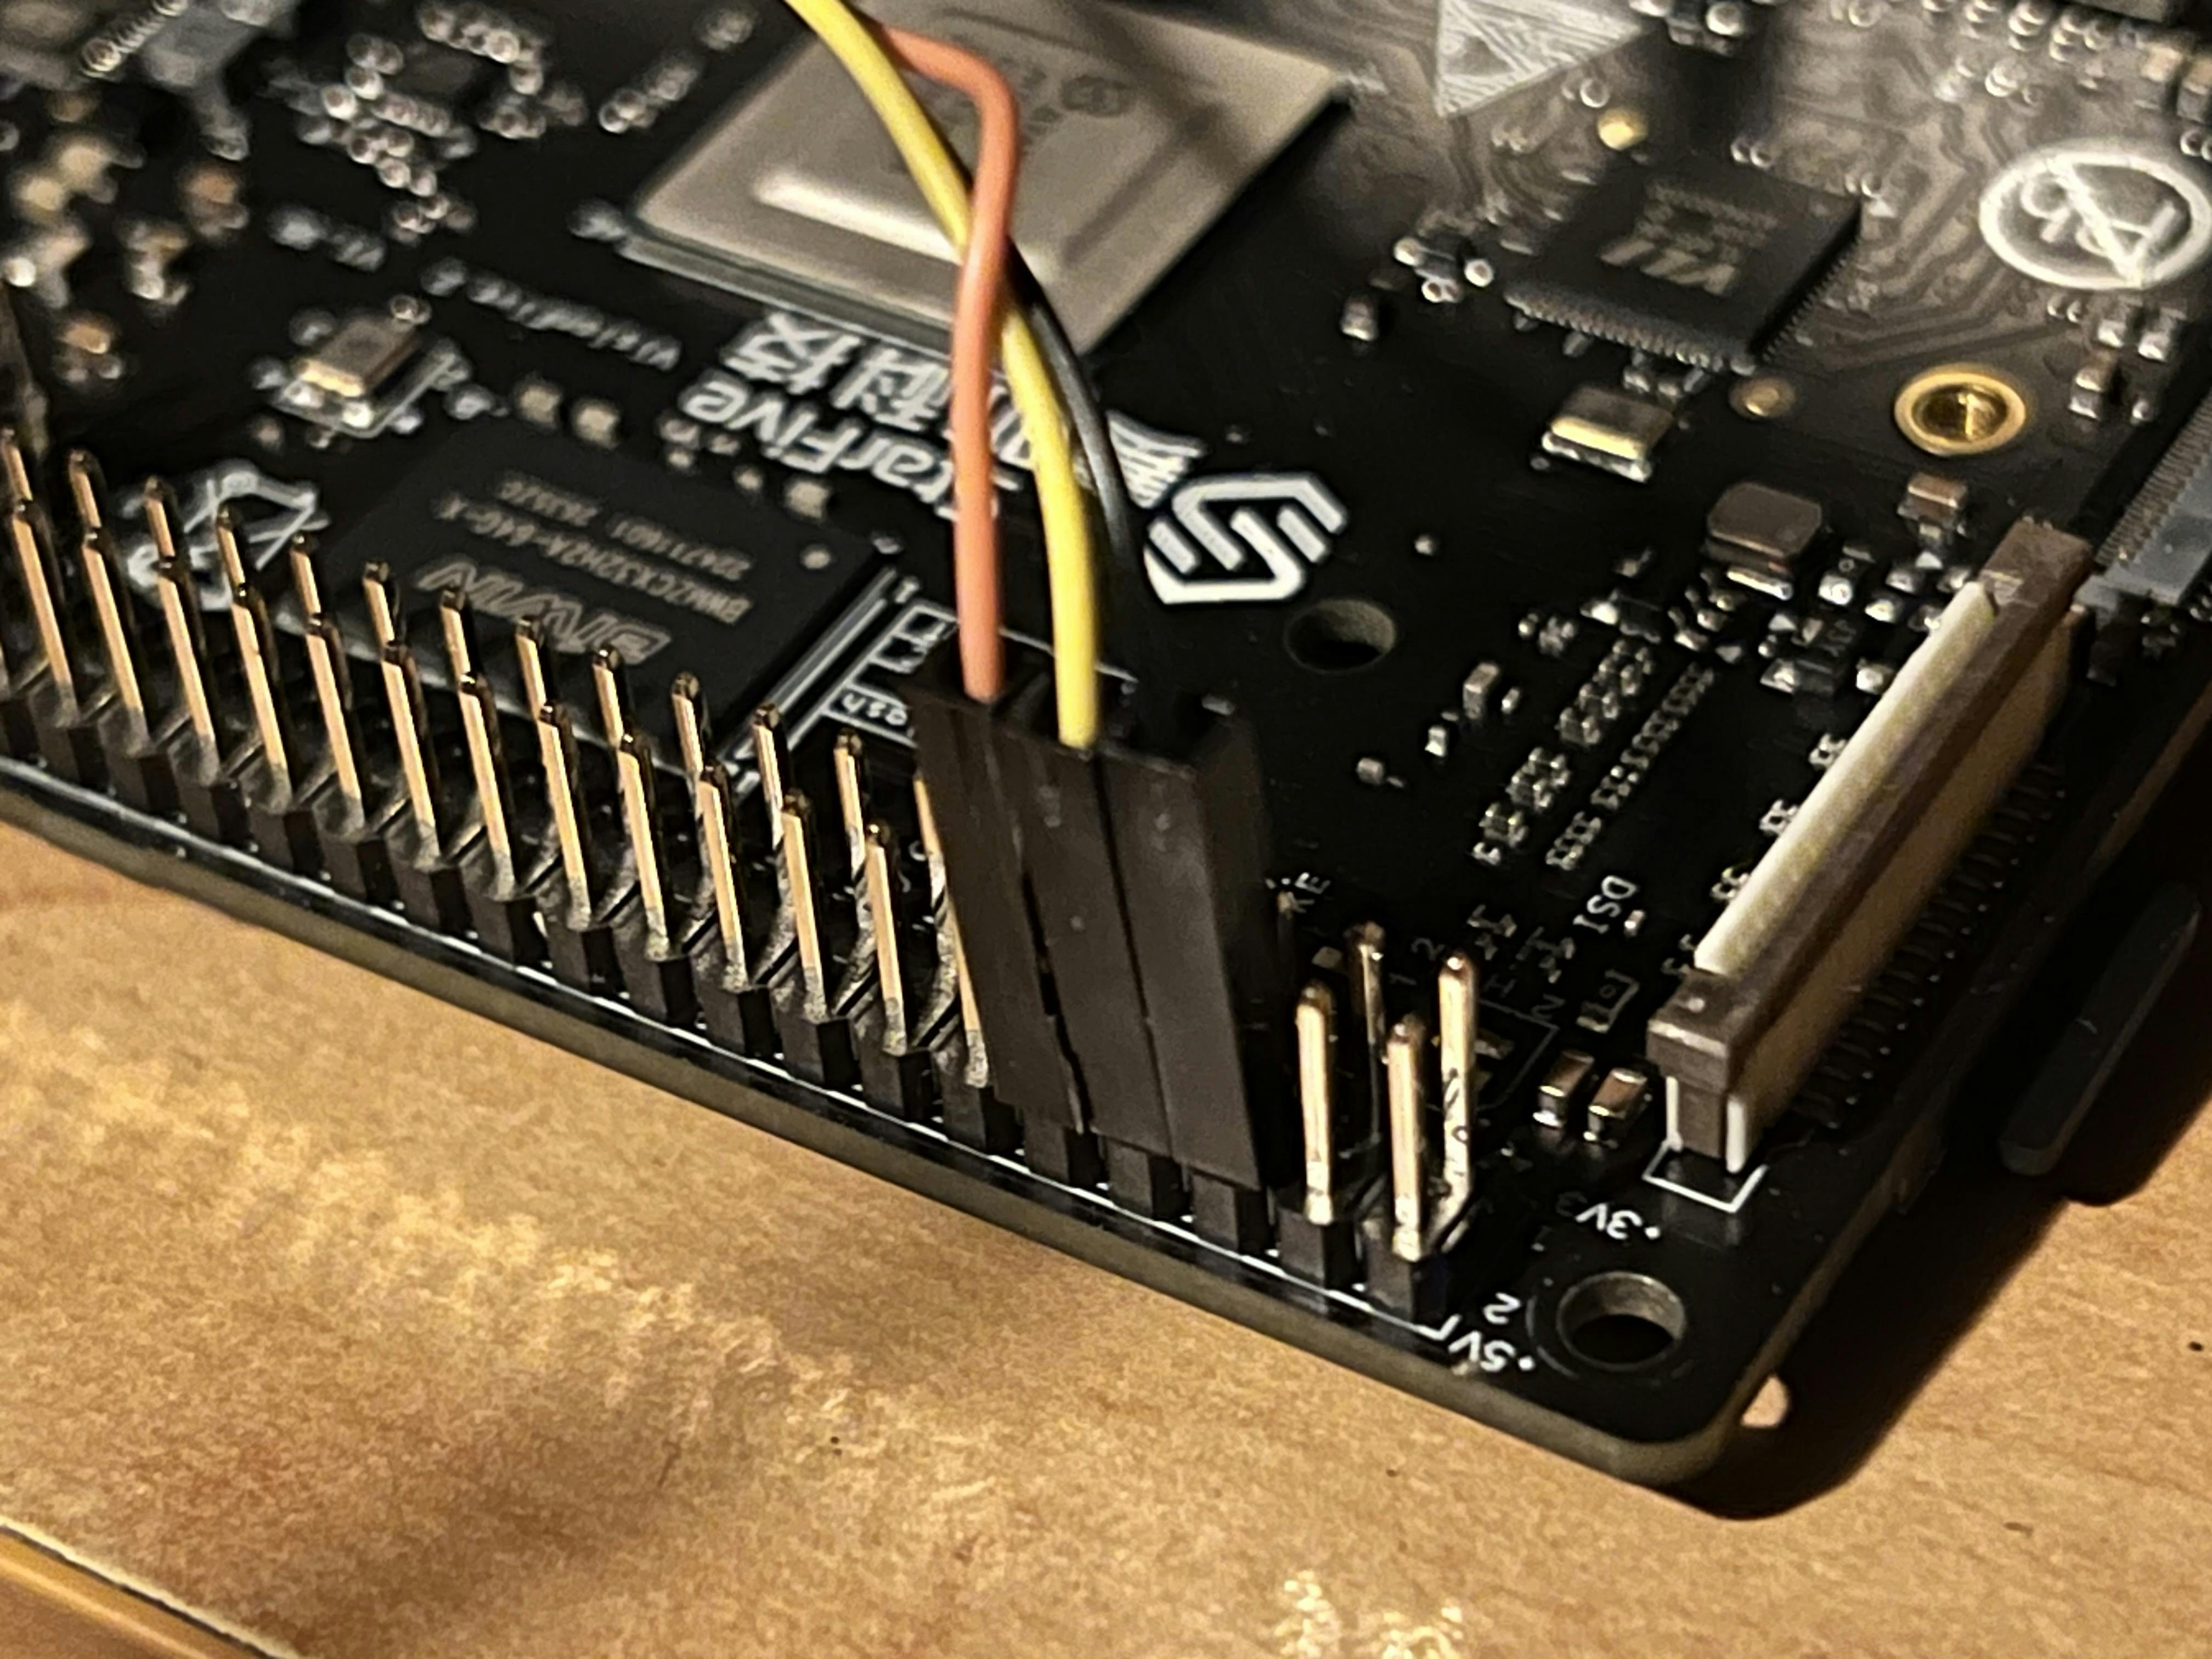 StarFive VisionFive2 Board With UART Connected